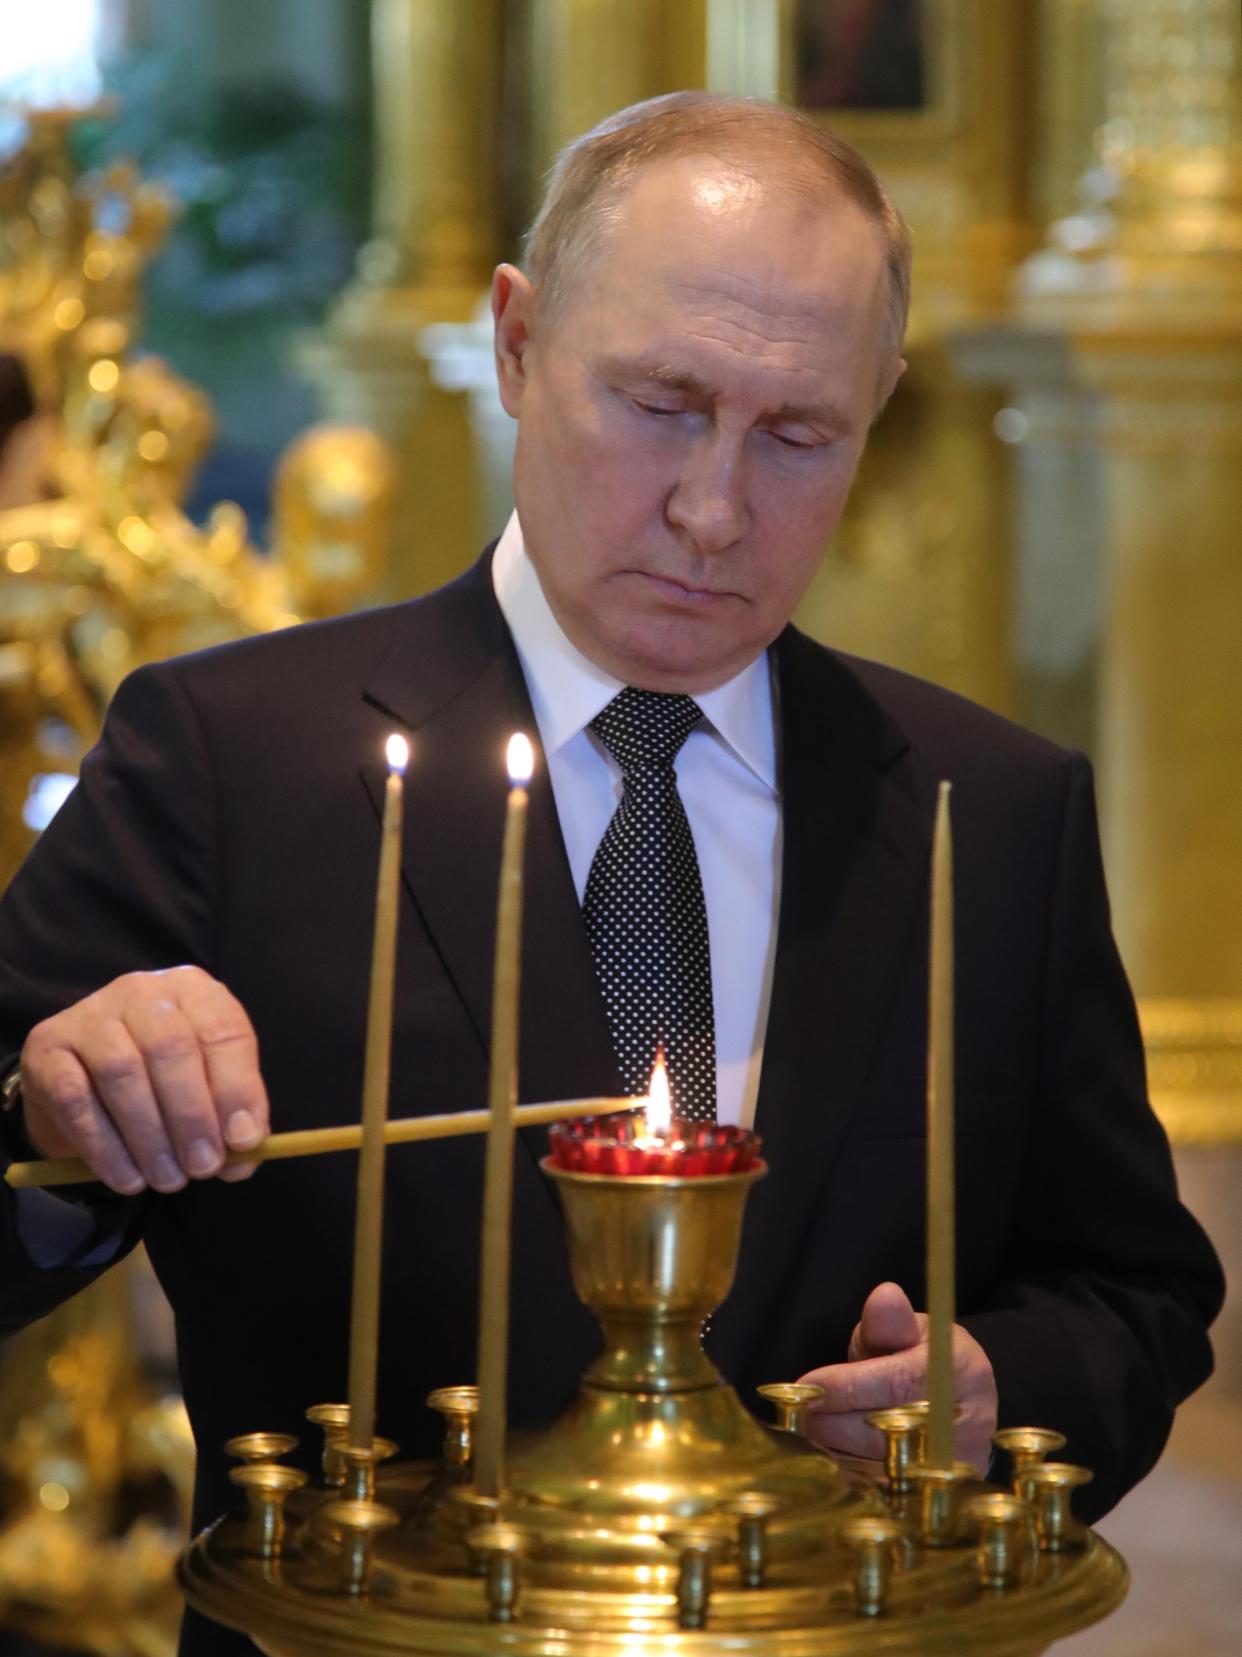 FILE - Russian President Vladimir Putin lights a candle visiting the Peter and Paul Cathedral prior to signing the decrees approving the Naval Doctrine and the Ship Charter of the Russian Navy in the St. Petersburg State History Museum and before the main naval parade marking Russian Navy Day in St. Petersburg, Russia, Sunday, July 31, 2022. Putin, who turned 70 on Friday, has found himself increasingly cornered with his army suffering humiliating defeats in Ukraine, hundreds of thousands of Russians fleeing his mobilization order and rifts opening up among his top lieutenants. (Mikhail Klimentyev, Sputnik, Kremlin Pool Photo via AP, File)